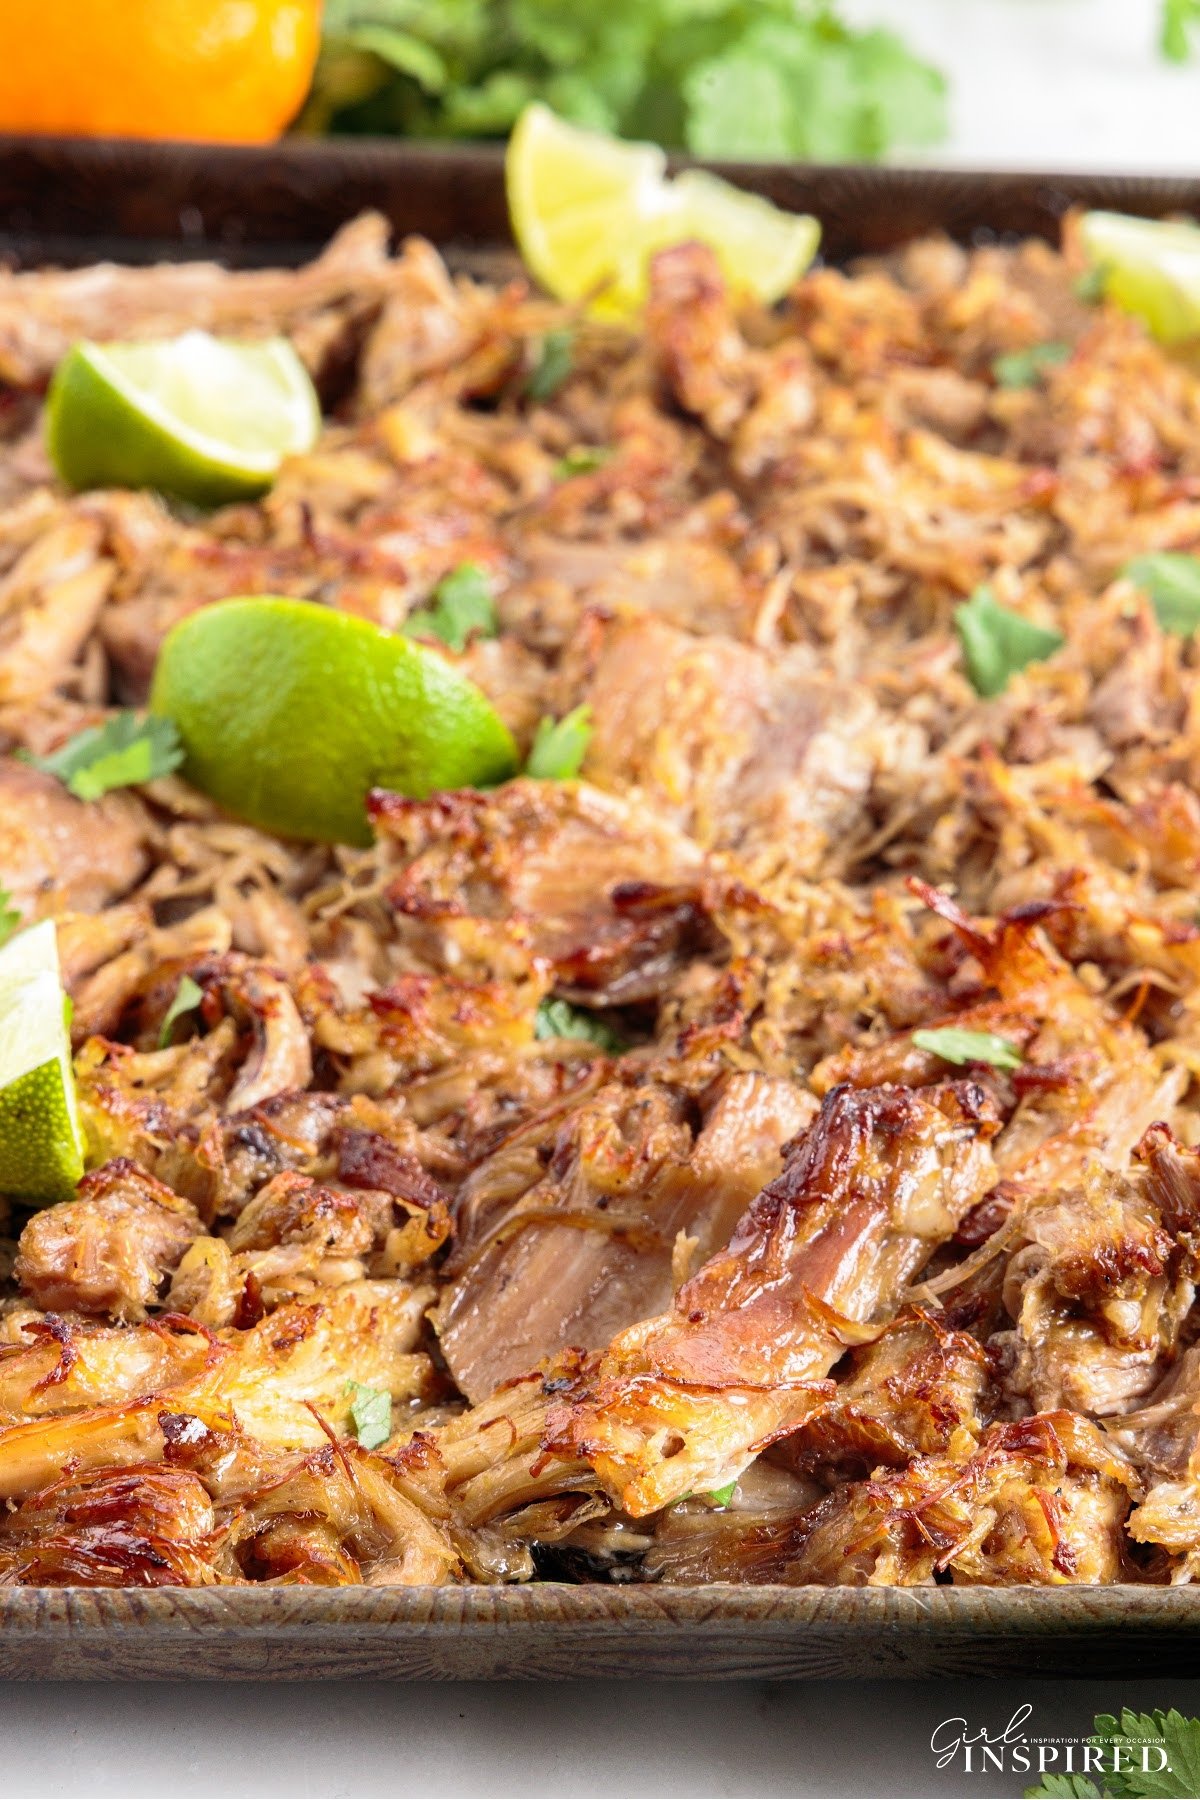 Mojo Pork shredded and ready to eat, garnished with lime,